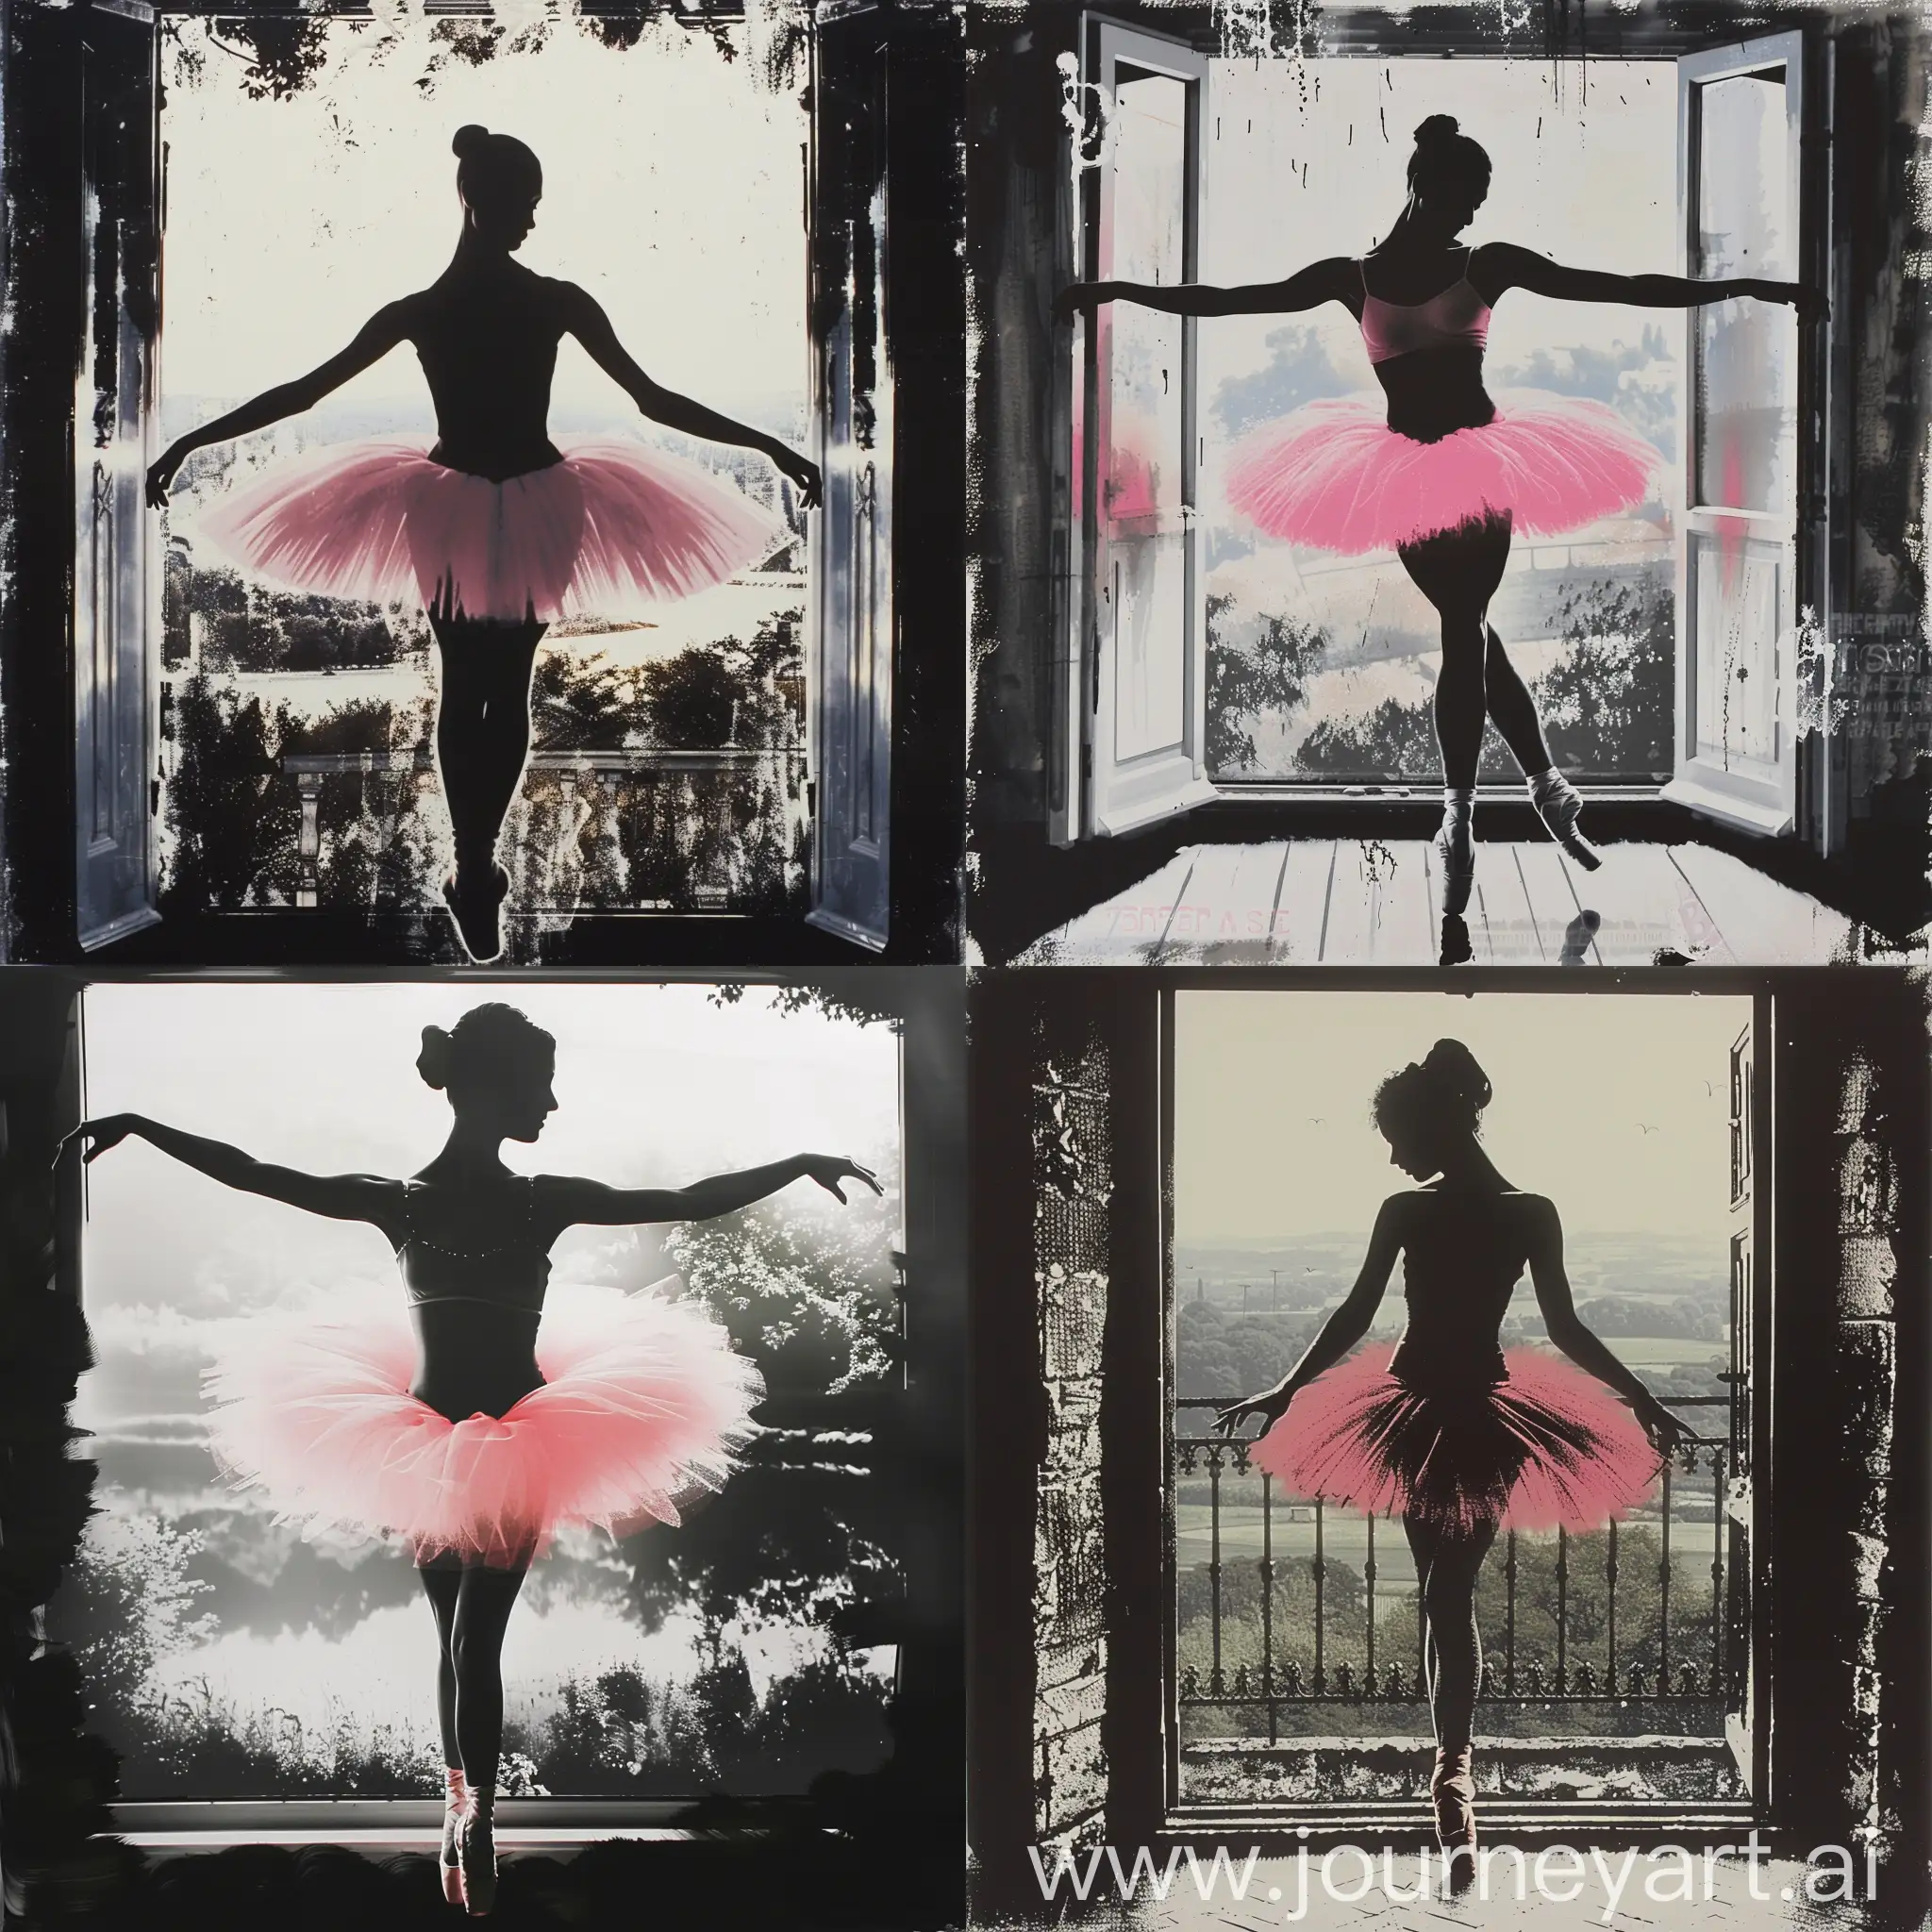 he ballerina is immersed in an elegant and delicate posture, with her arms extended to the sides and her head slightly tilted downwards. Her silhouette gracefully contrasts against the illuminated background, creating a notable contrast between the softness of her costume and the depth of the surrounding shadows.

The pink tutu and slippers subtly stand out amidst the black and white palette, adding a touch of soft, feminine color to the composition. The ballerina appears to be immersed in a moment of concentration and grace, capturing the ethereal beauty and timeless elegance of the art of dance.

Through the window, an exterior landscape is glimpsed, suggested by the light filtering through and creating a gentle glow in the surrounding space. The combination of the ballerina's figure and the outdoor scenery evokes a sense of serenity and connection with the world around her."

